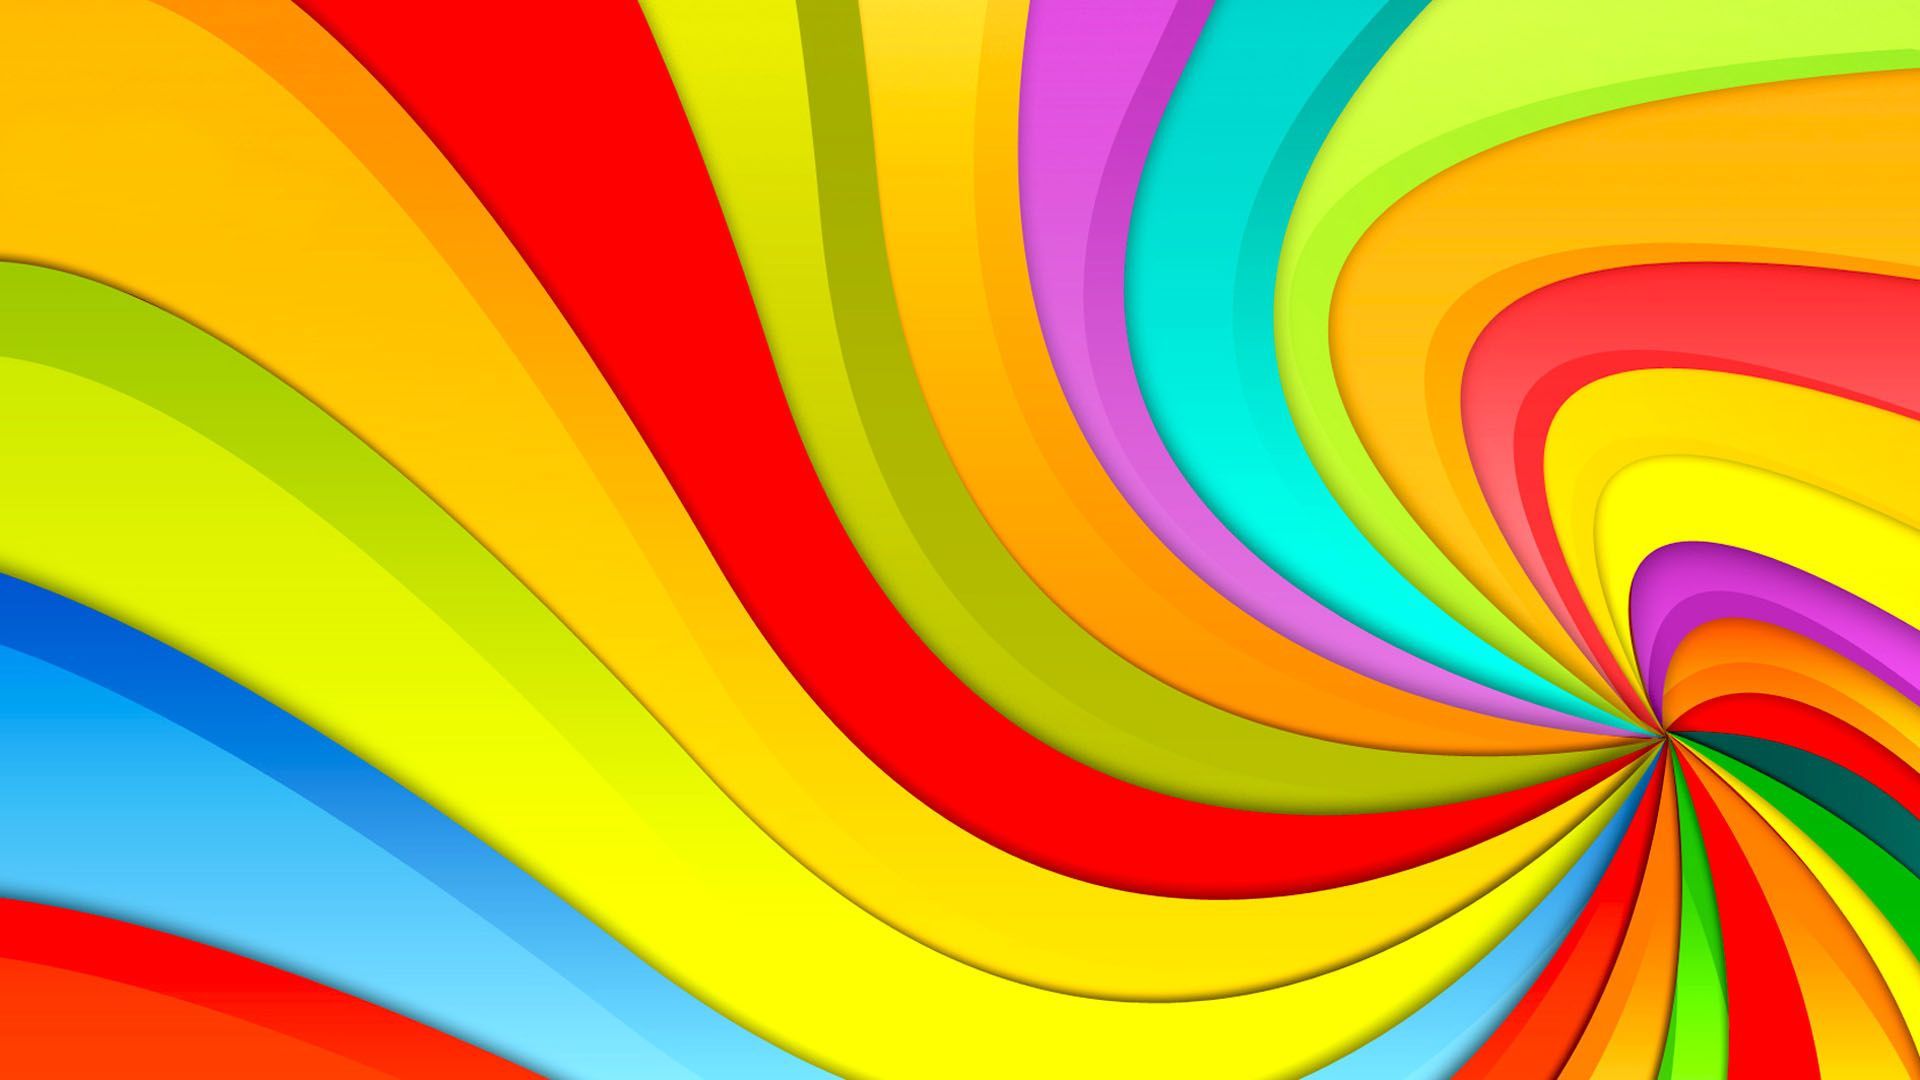 Bright Color Backgrounds wallpaper 1920x1080